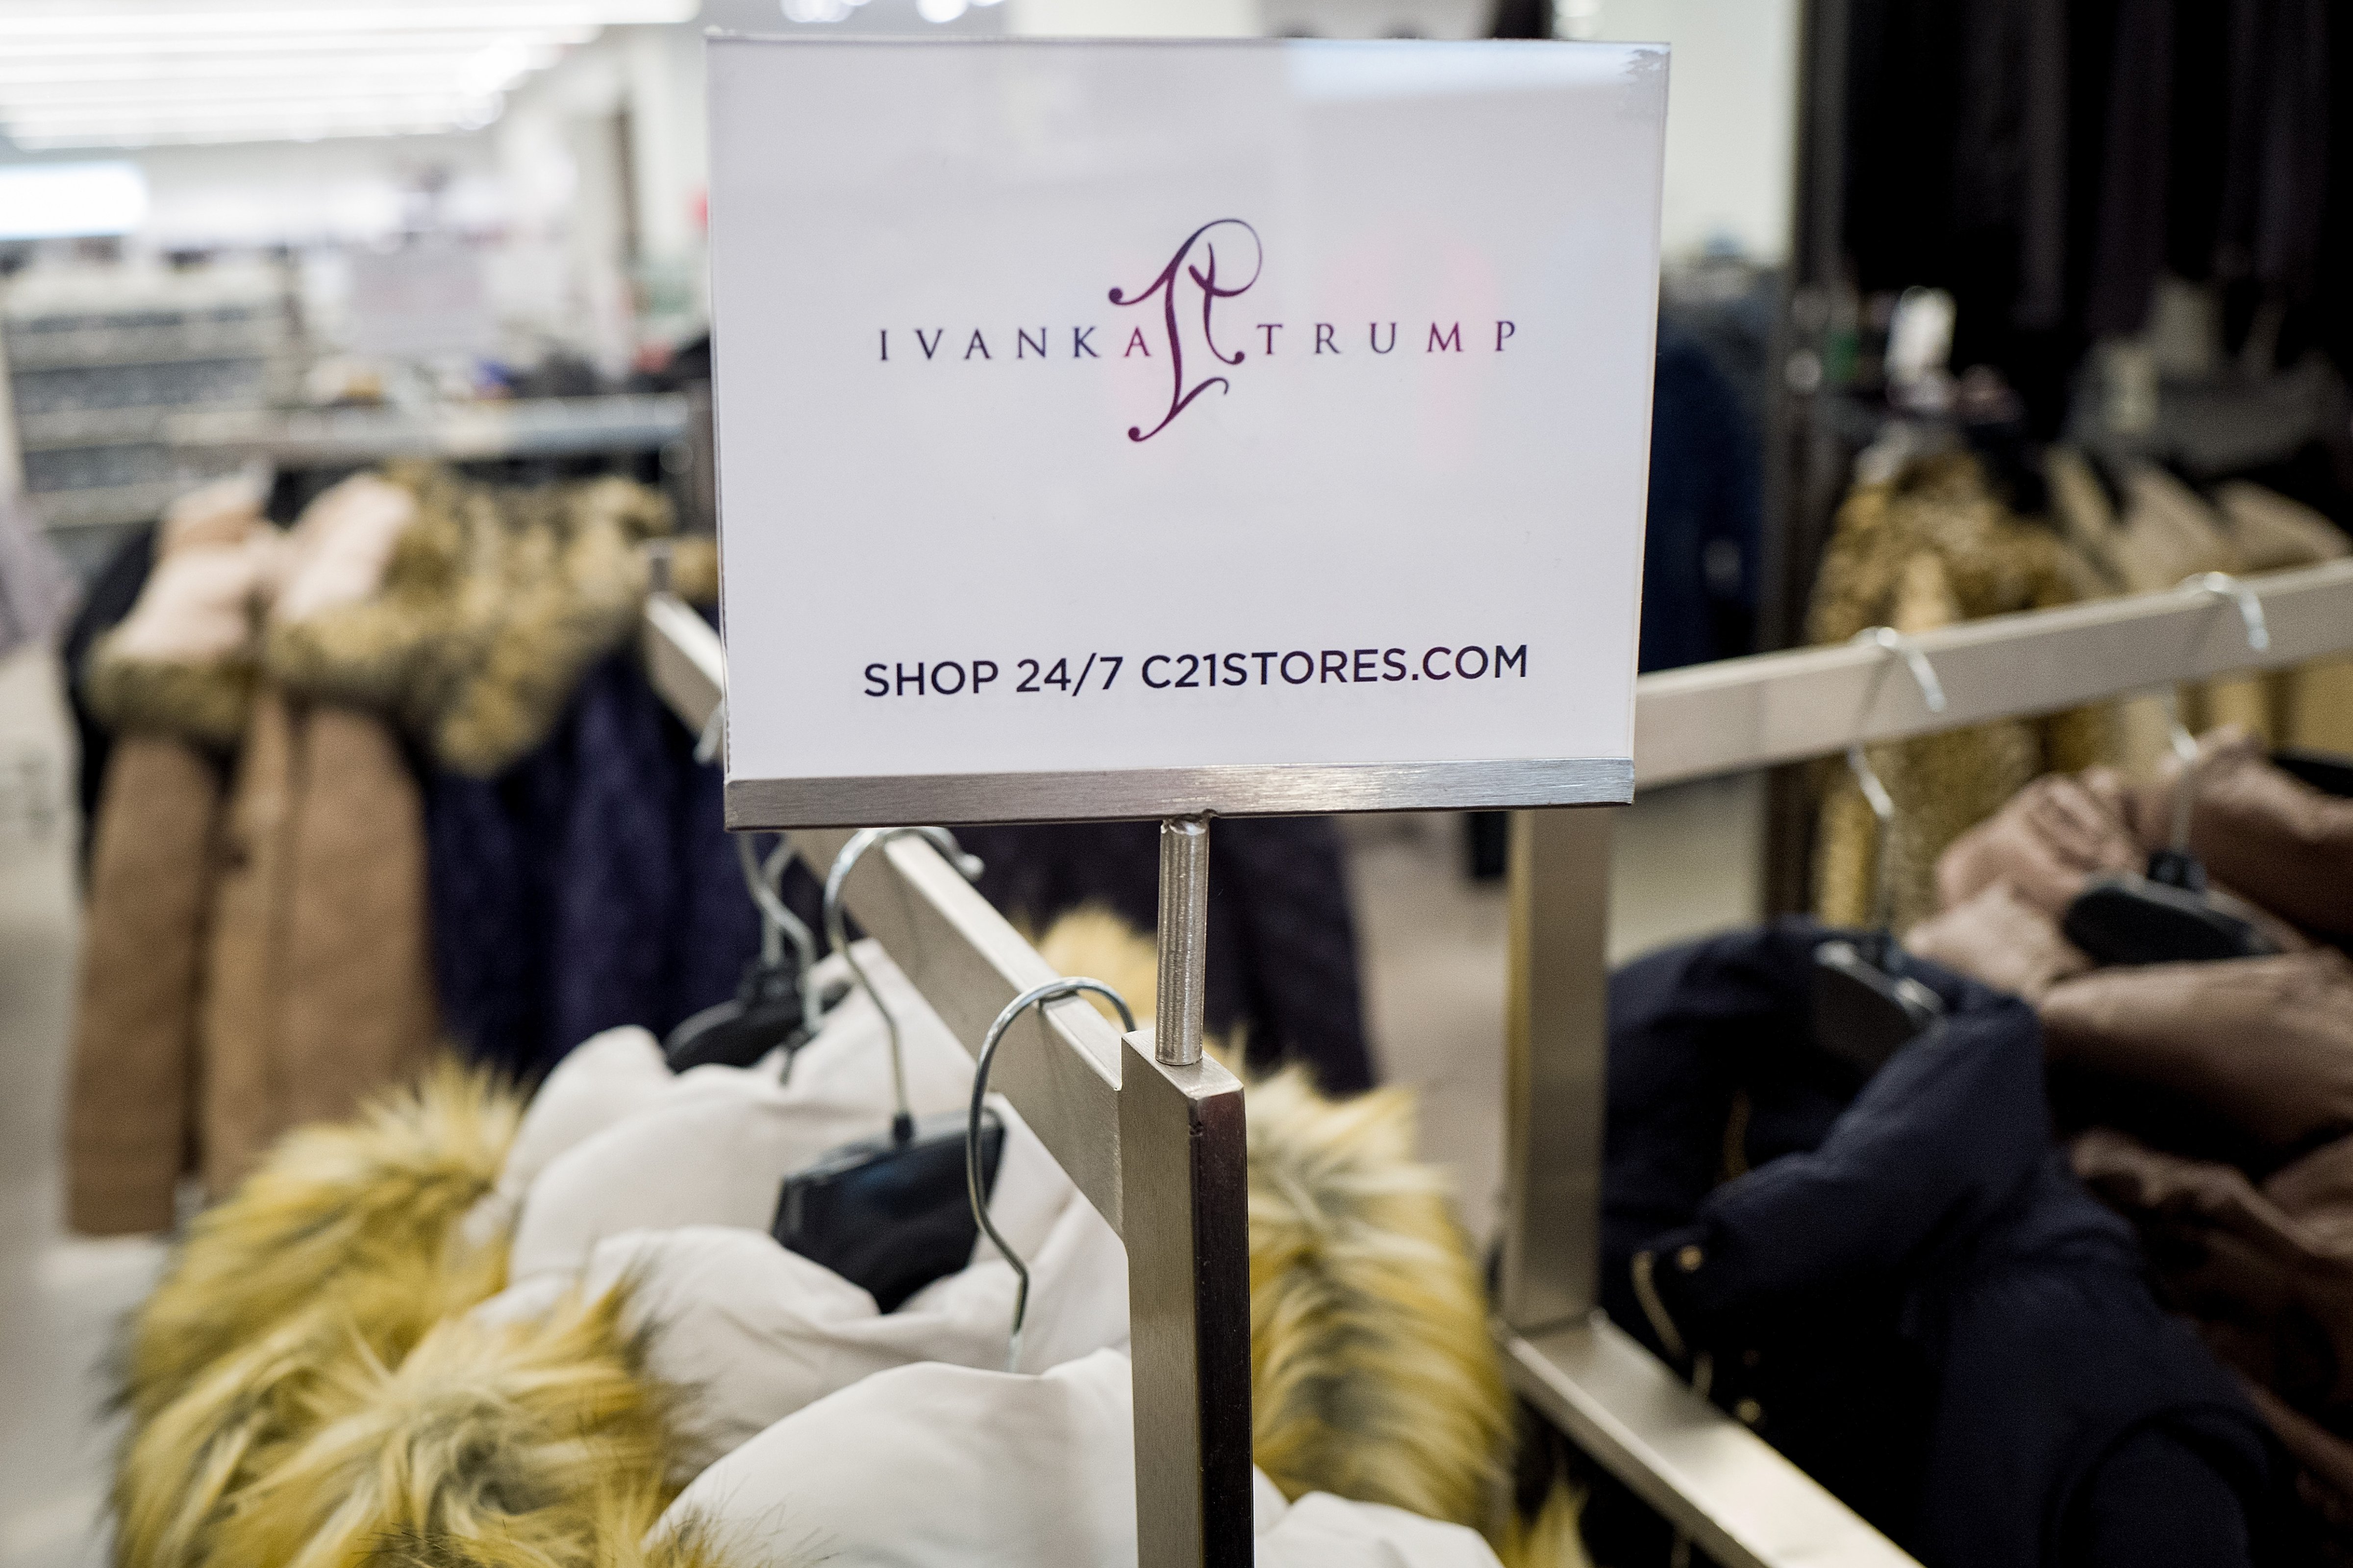 NEW YORK, NY - FEBRUARY 10: A sign for Ivanka Trump brand is displayed atop a rack of Ivanka Trump brand coats for sale at the Century 21 department store February 10, 2017 in New York City. According to a market research firm Slice Intelligence, Ivanka Trump merchandise saw a 26 percent dip in sales in January 2017 compared to January 2016. Kellyanne Conway, a senior counselor to President Donald Trump, has been accused of ethics violations for promoting the Ivanka Trump fashion line during a television interview on Thursday. (Photo by Drew Angerer/Getty Images) (Drew Angerer—Getty Images)